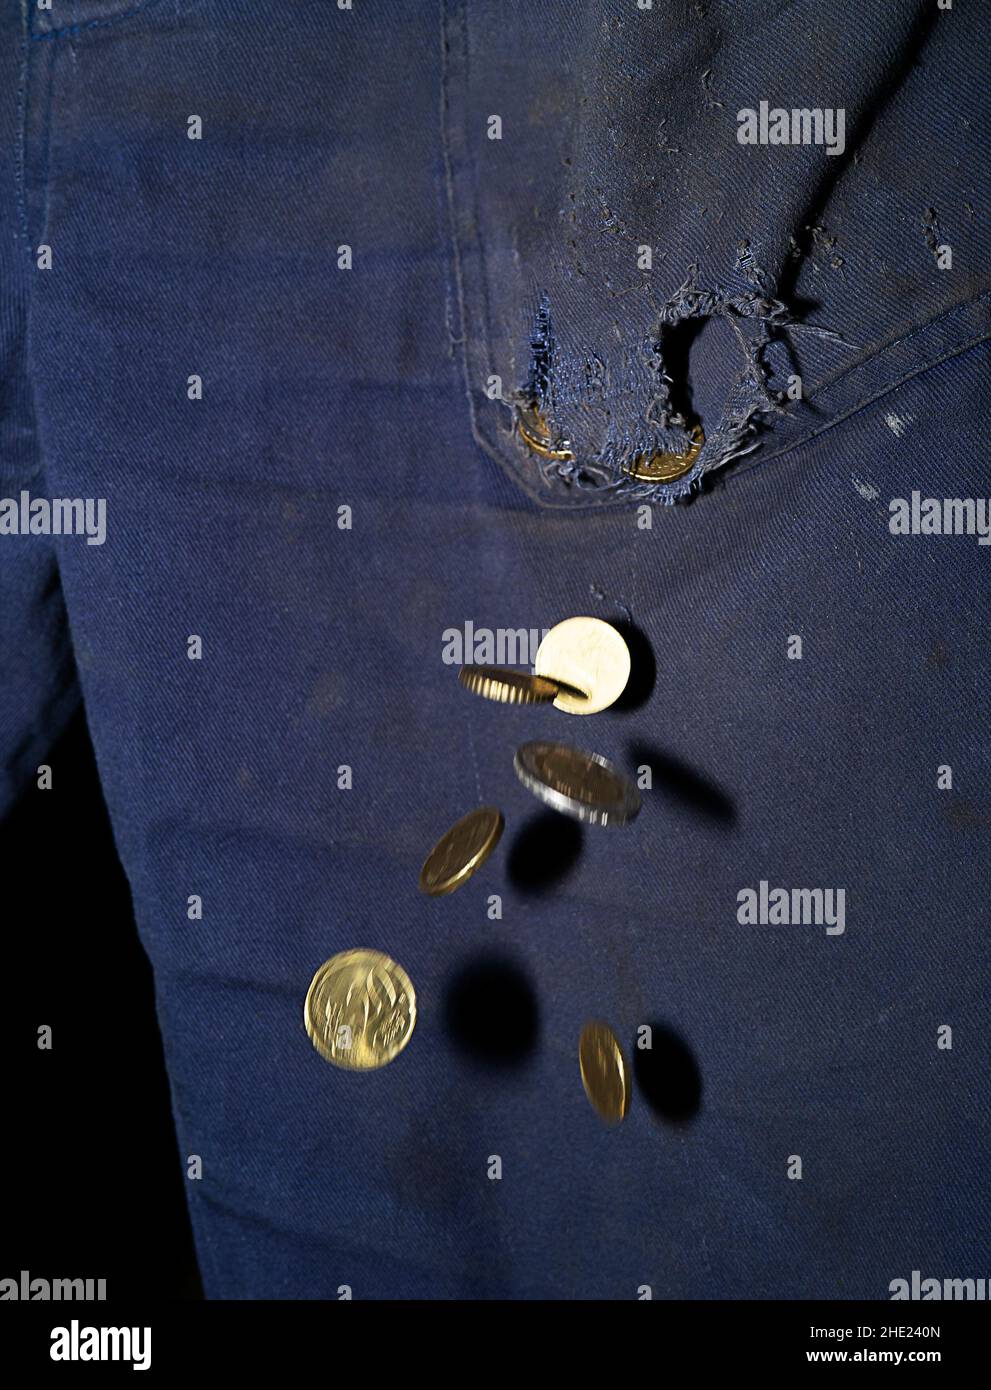 Euro coins falling from a hole in the trousers pocket. Stock Photo